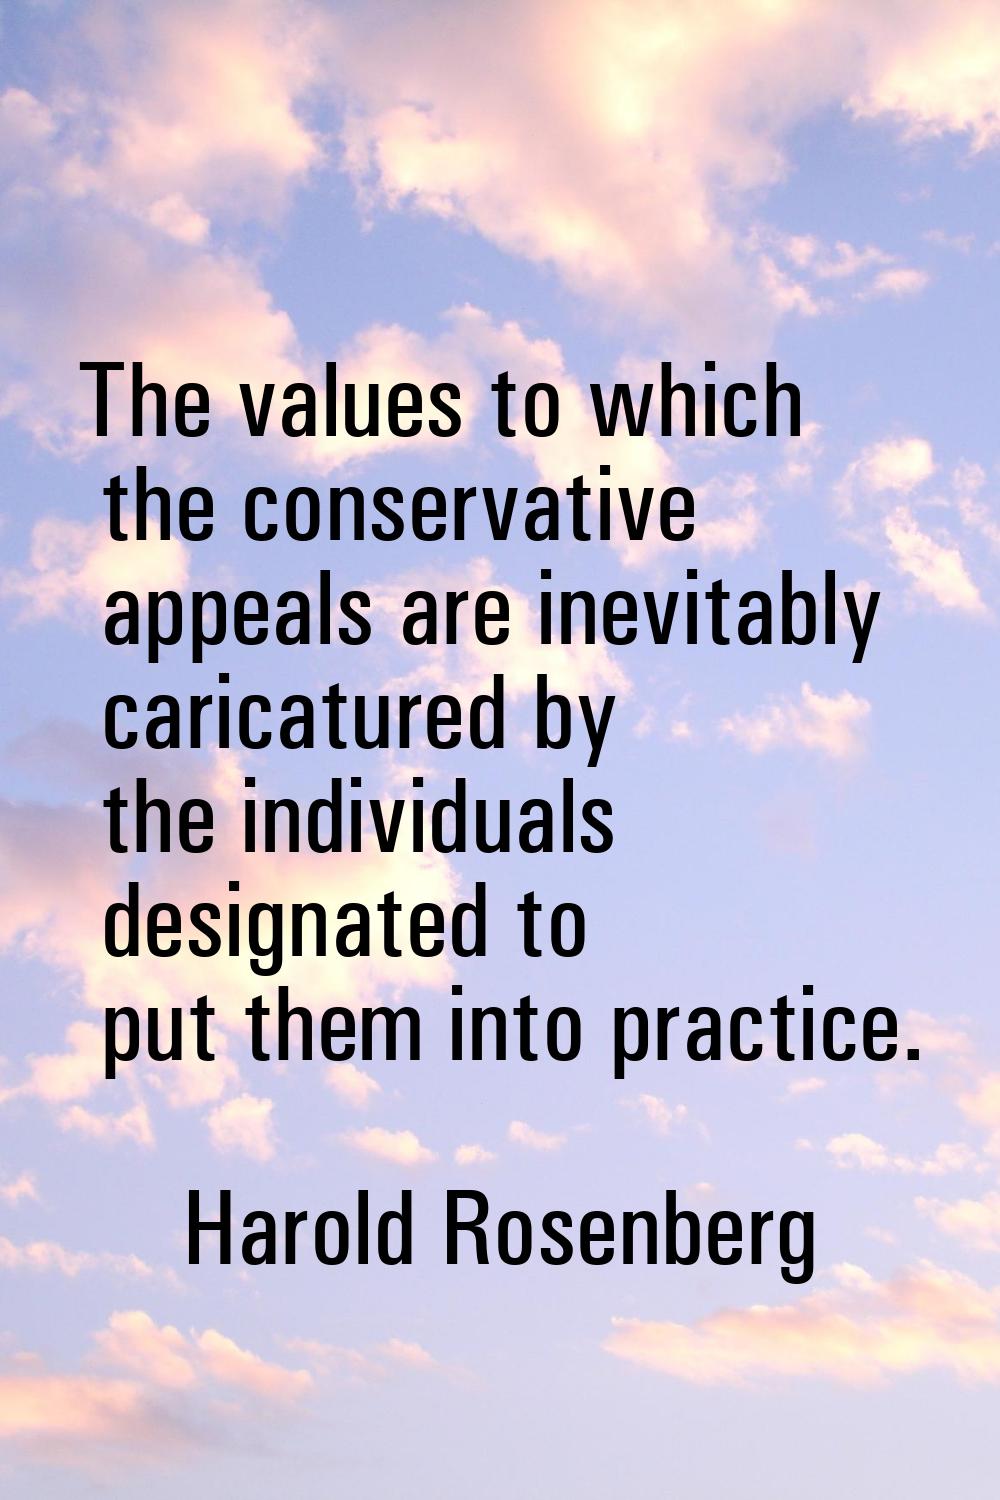 The values to which the conservative appeals are inevitably caricatured by the individuals designat